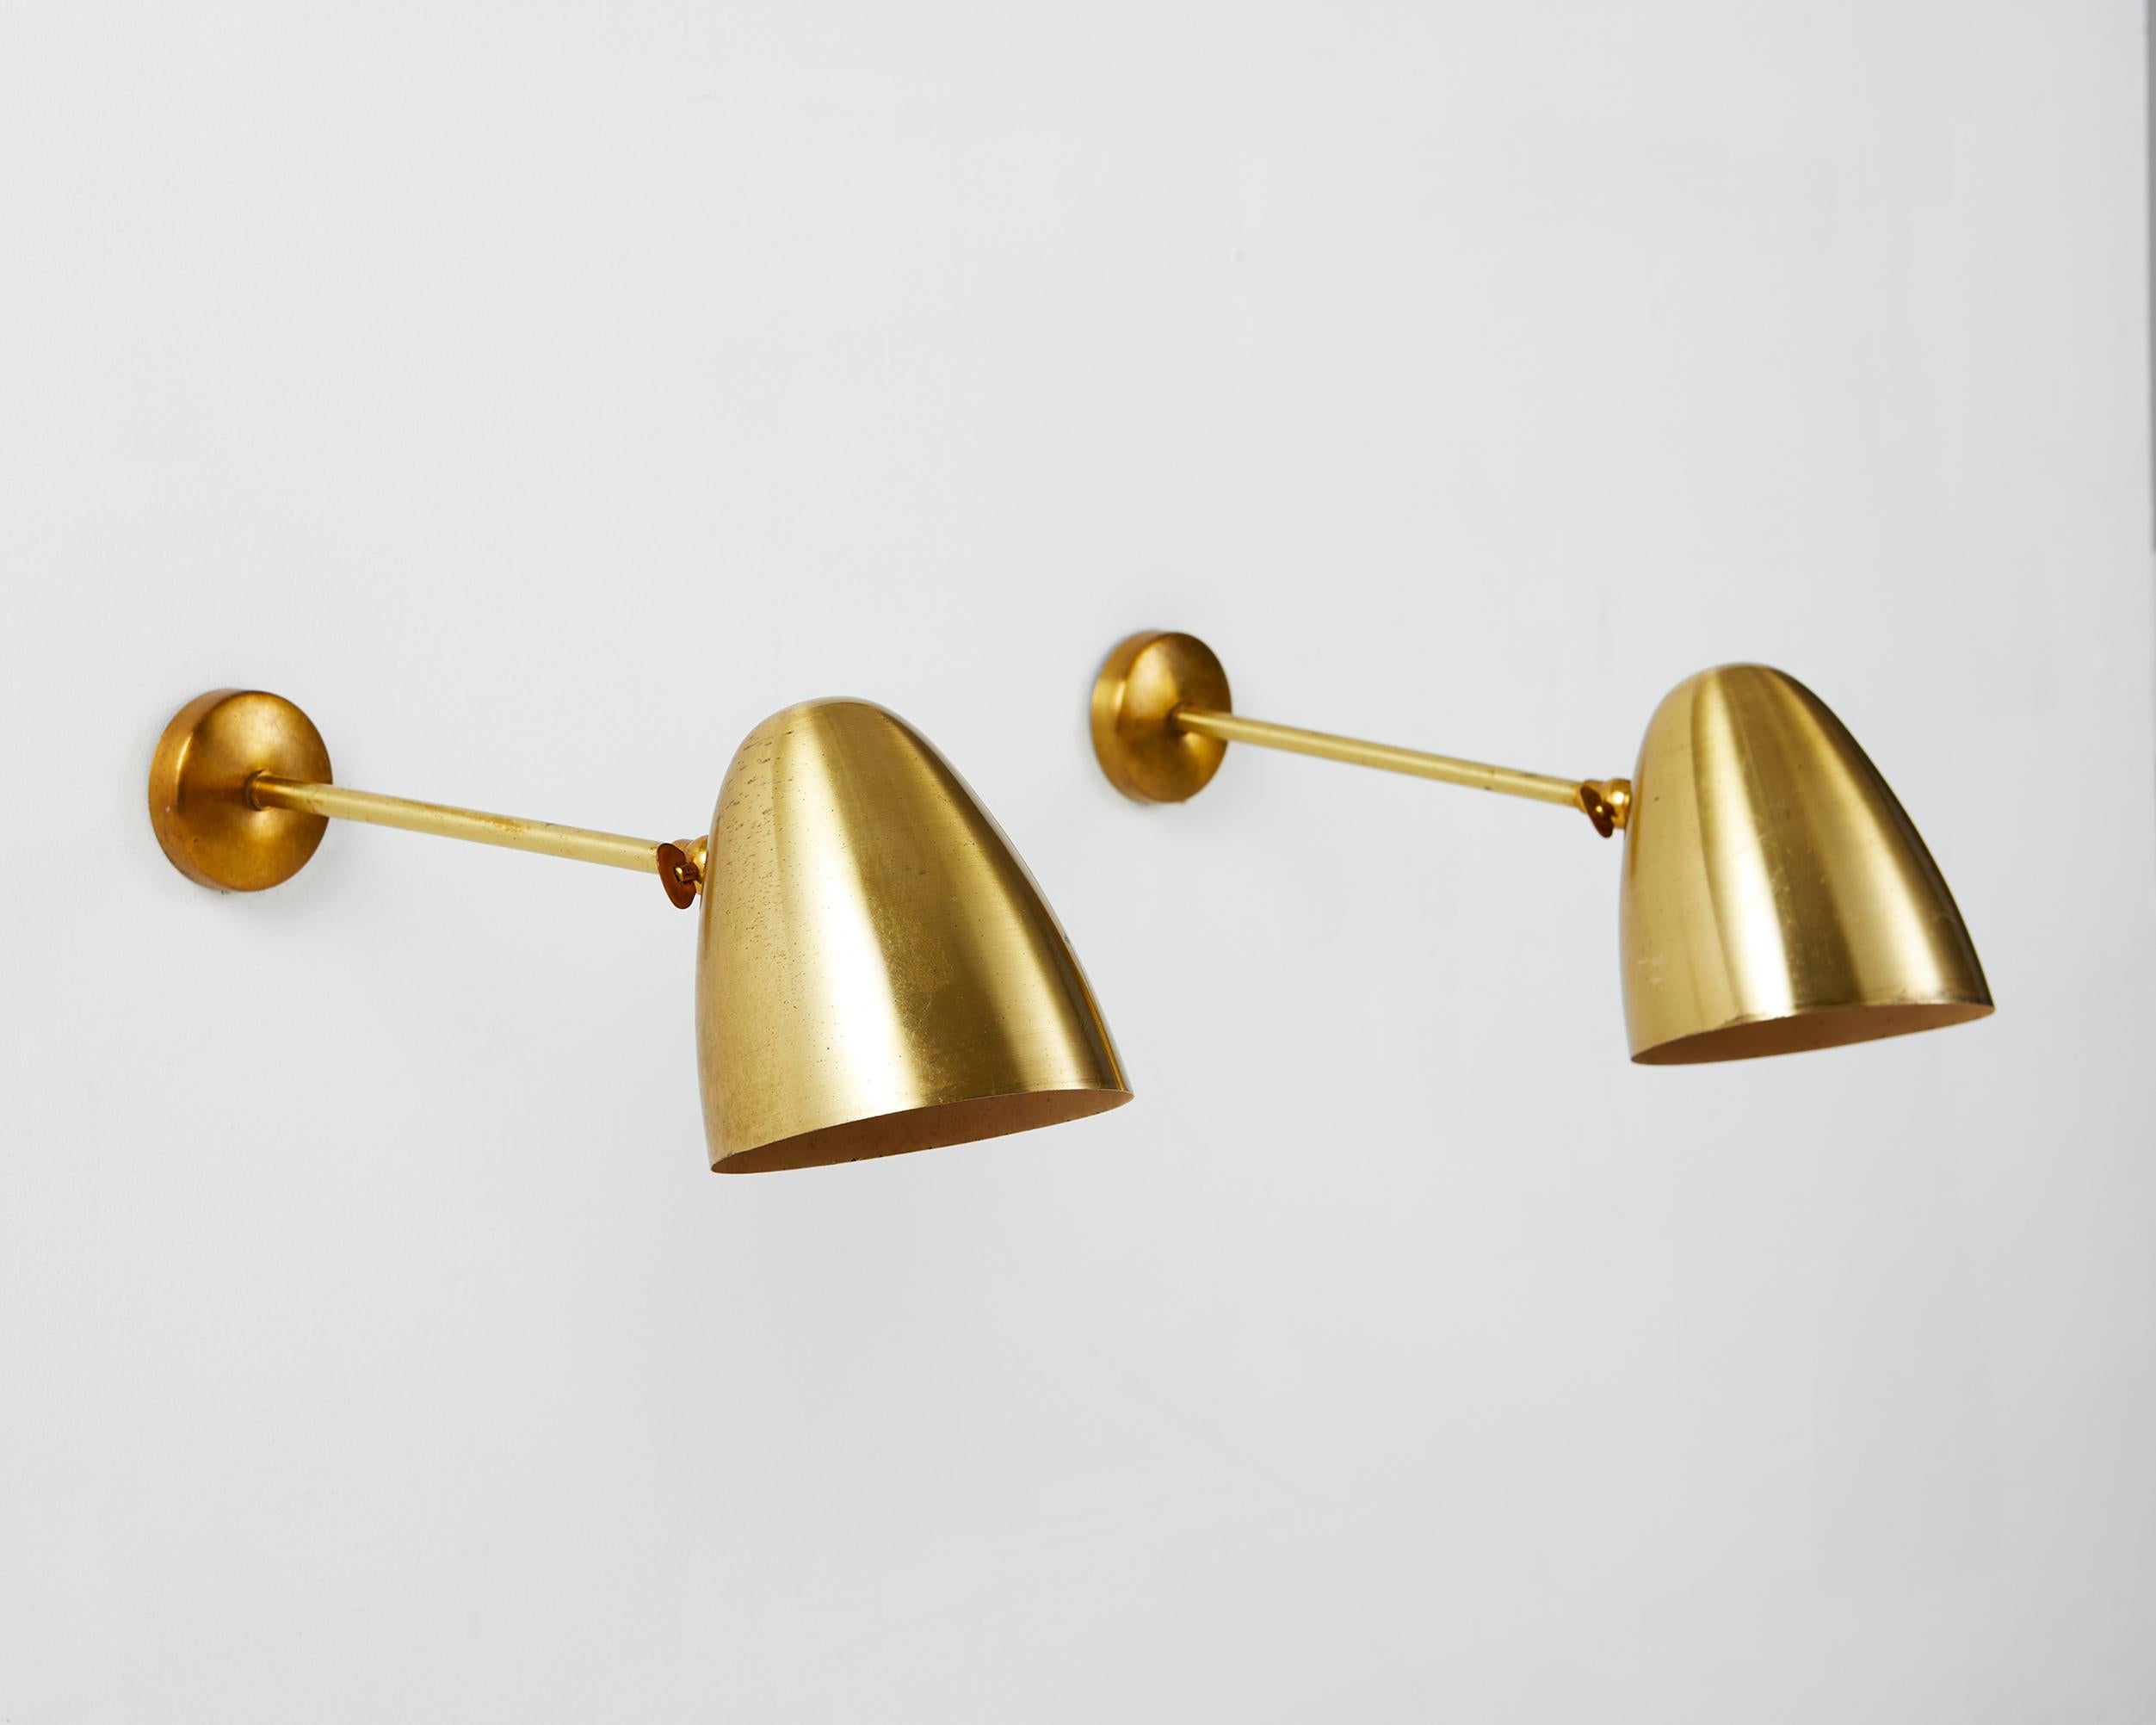 Pair of wall lamps, anonymous,
Denmark, 1950s.

Brass.

The small bullet-shaped lampshades of these smart brass lamps are exceptional examples of Danish lighting design. Their patina is stunning, and this pair is particularly elegant with thin stems